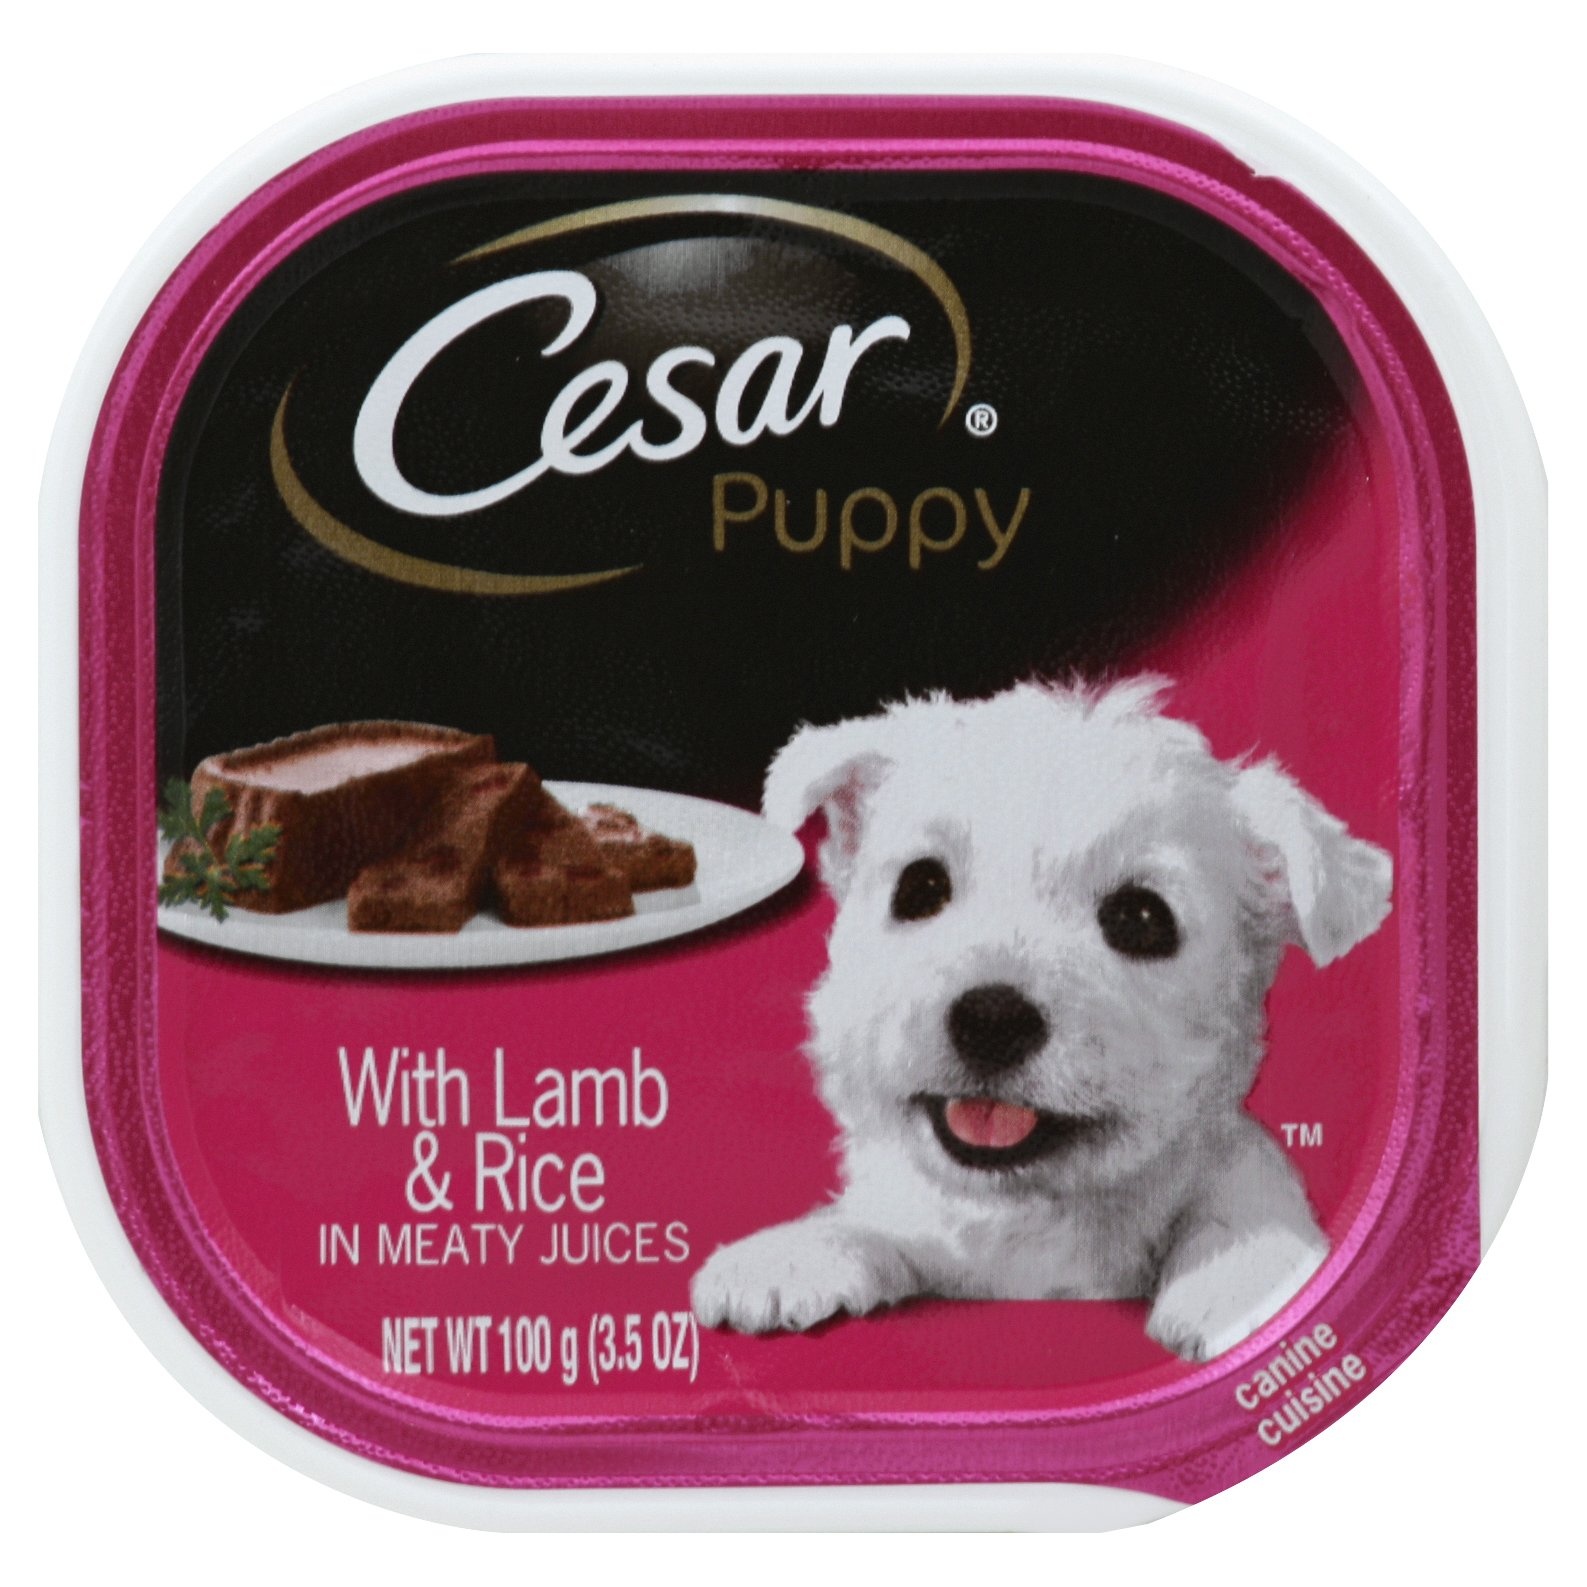 slide 1 of 1, Cesar Canine Cuisine Puppy With Lamb and Rice Puppy Food Tray, 3.5 oz